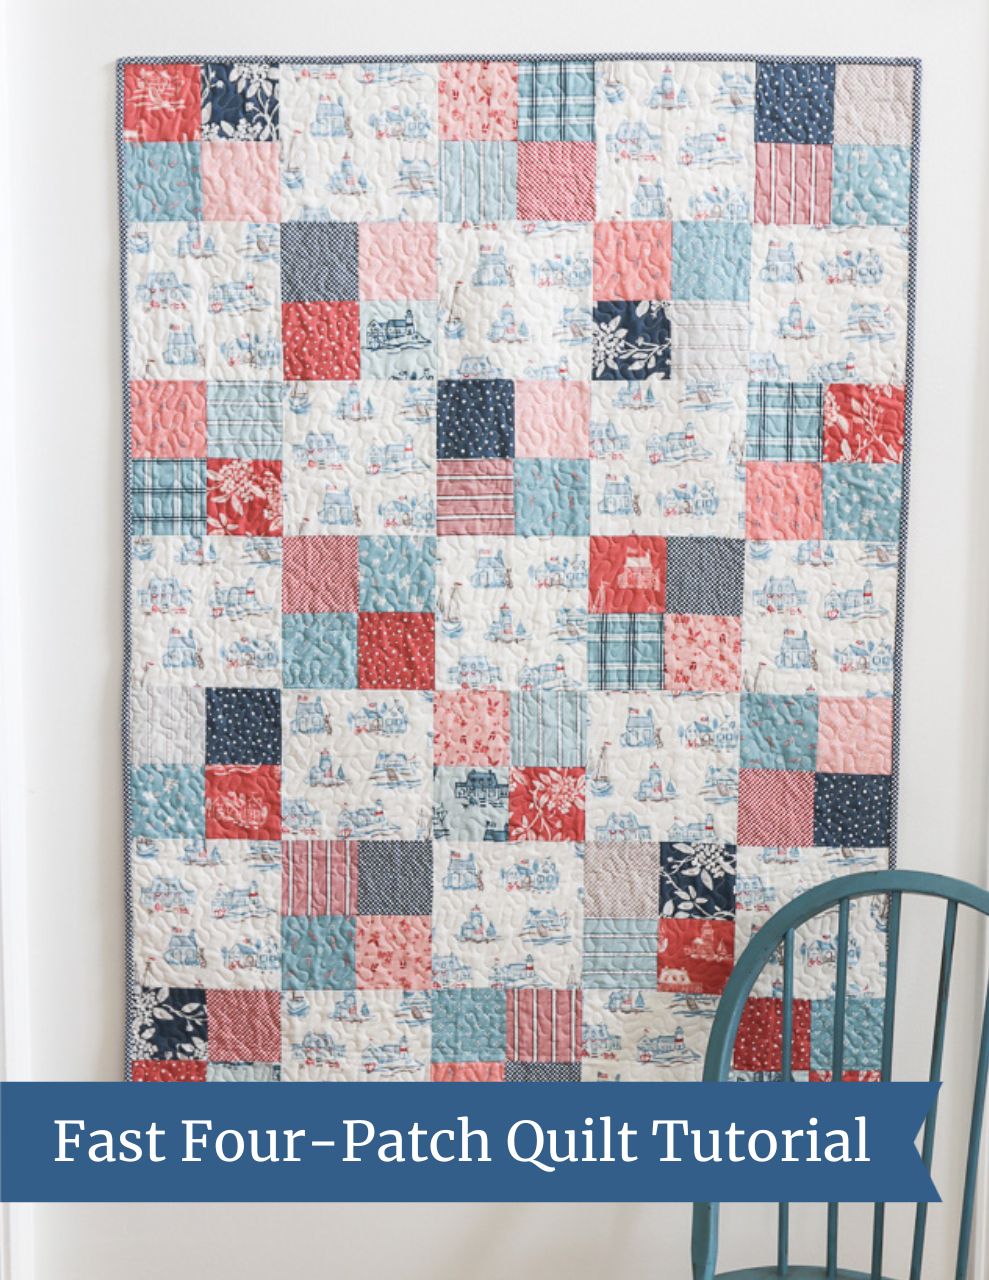 Easy Beginner Quilts Projects : Quilt Patterns for Beginners: Easy Quilt  Patterns (Paperback)